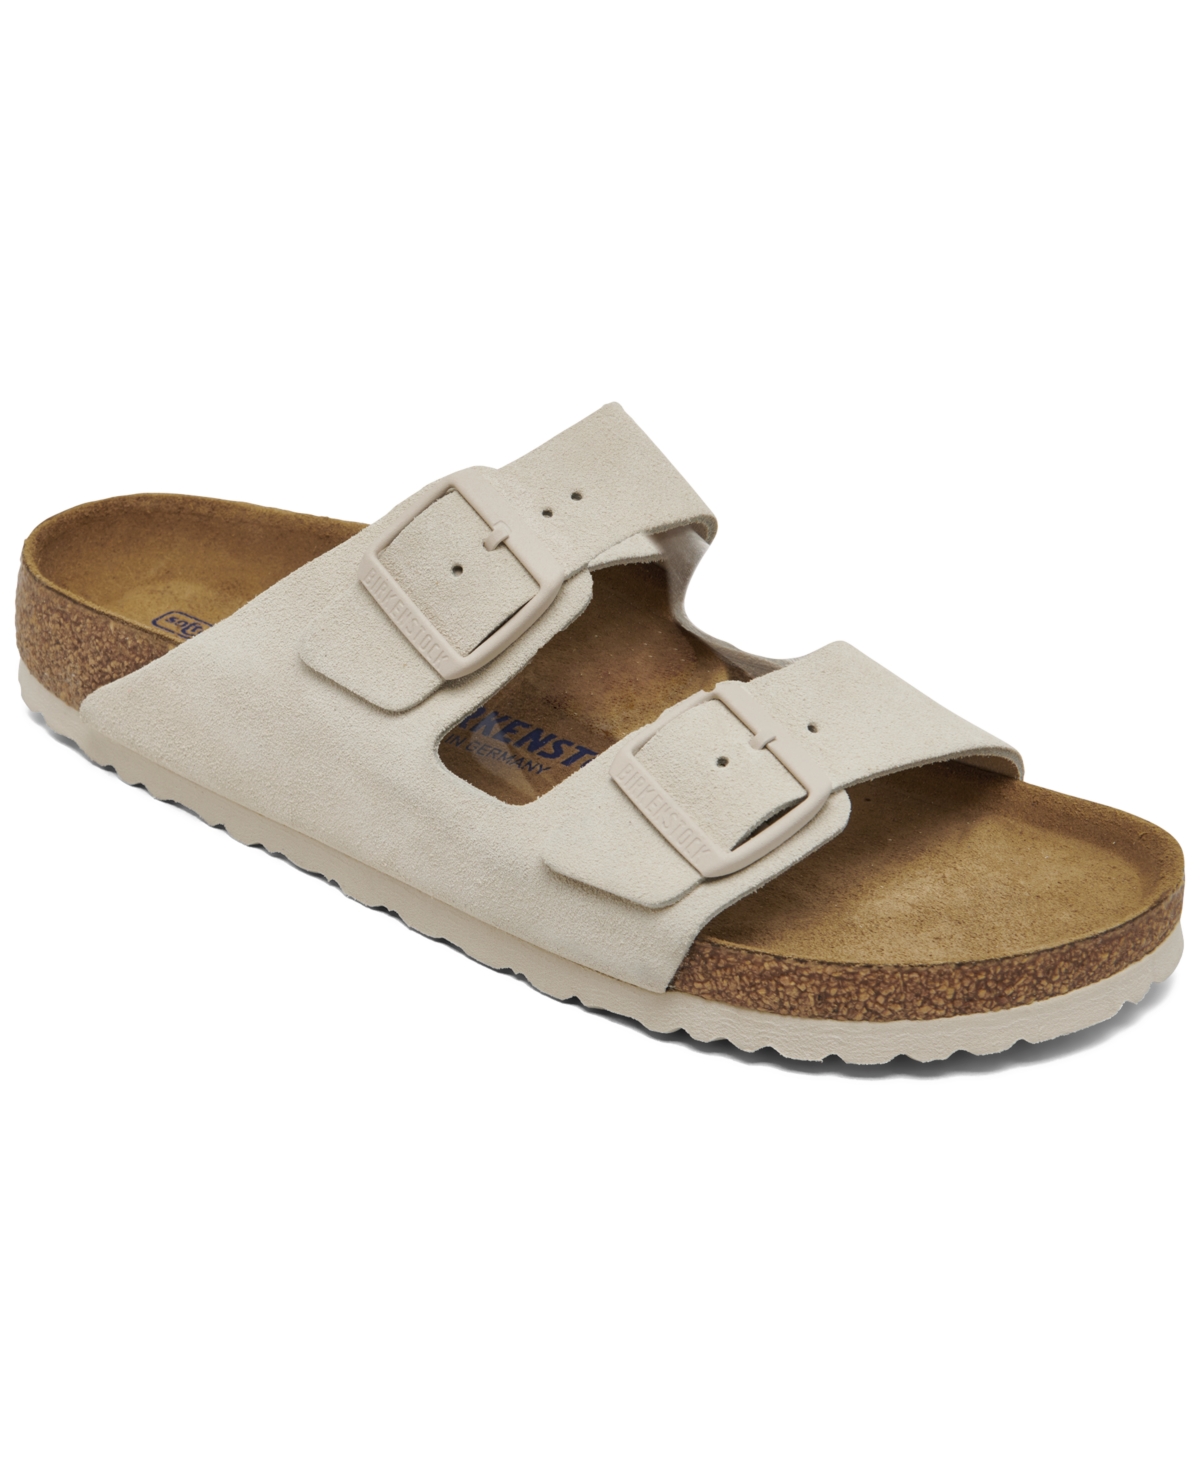 Shop Birkenstock Women's Arizona Soft Footbed Suede Leather Sandals From Finish Line In Antique-like White